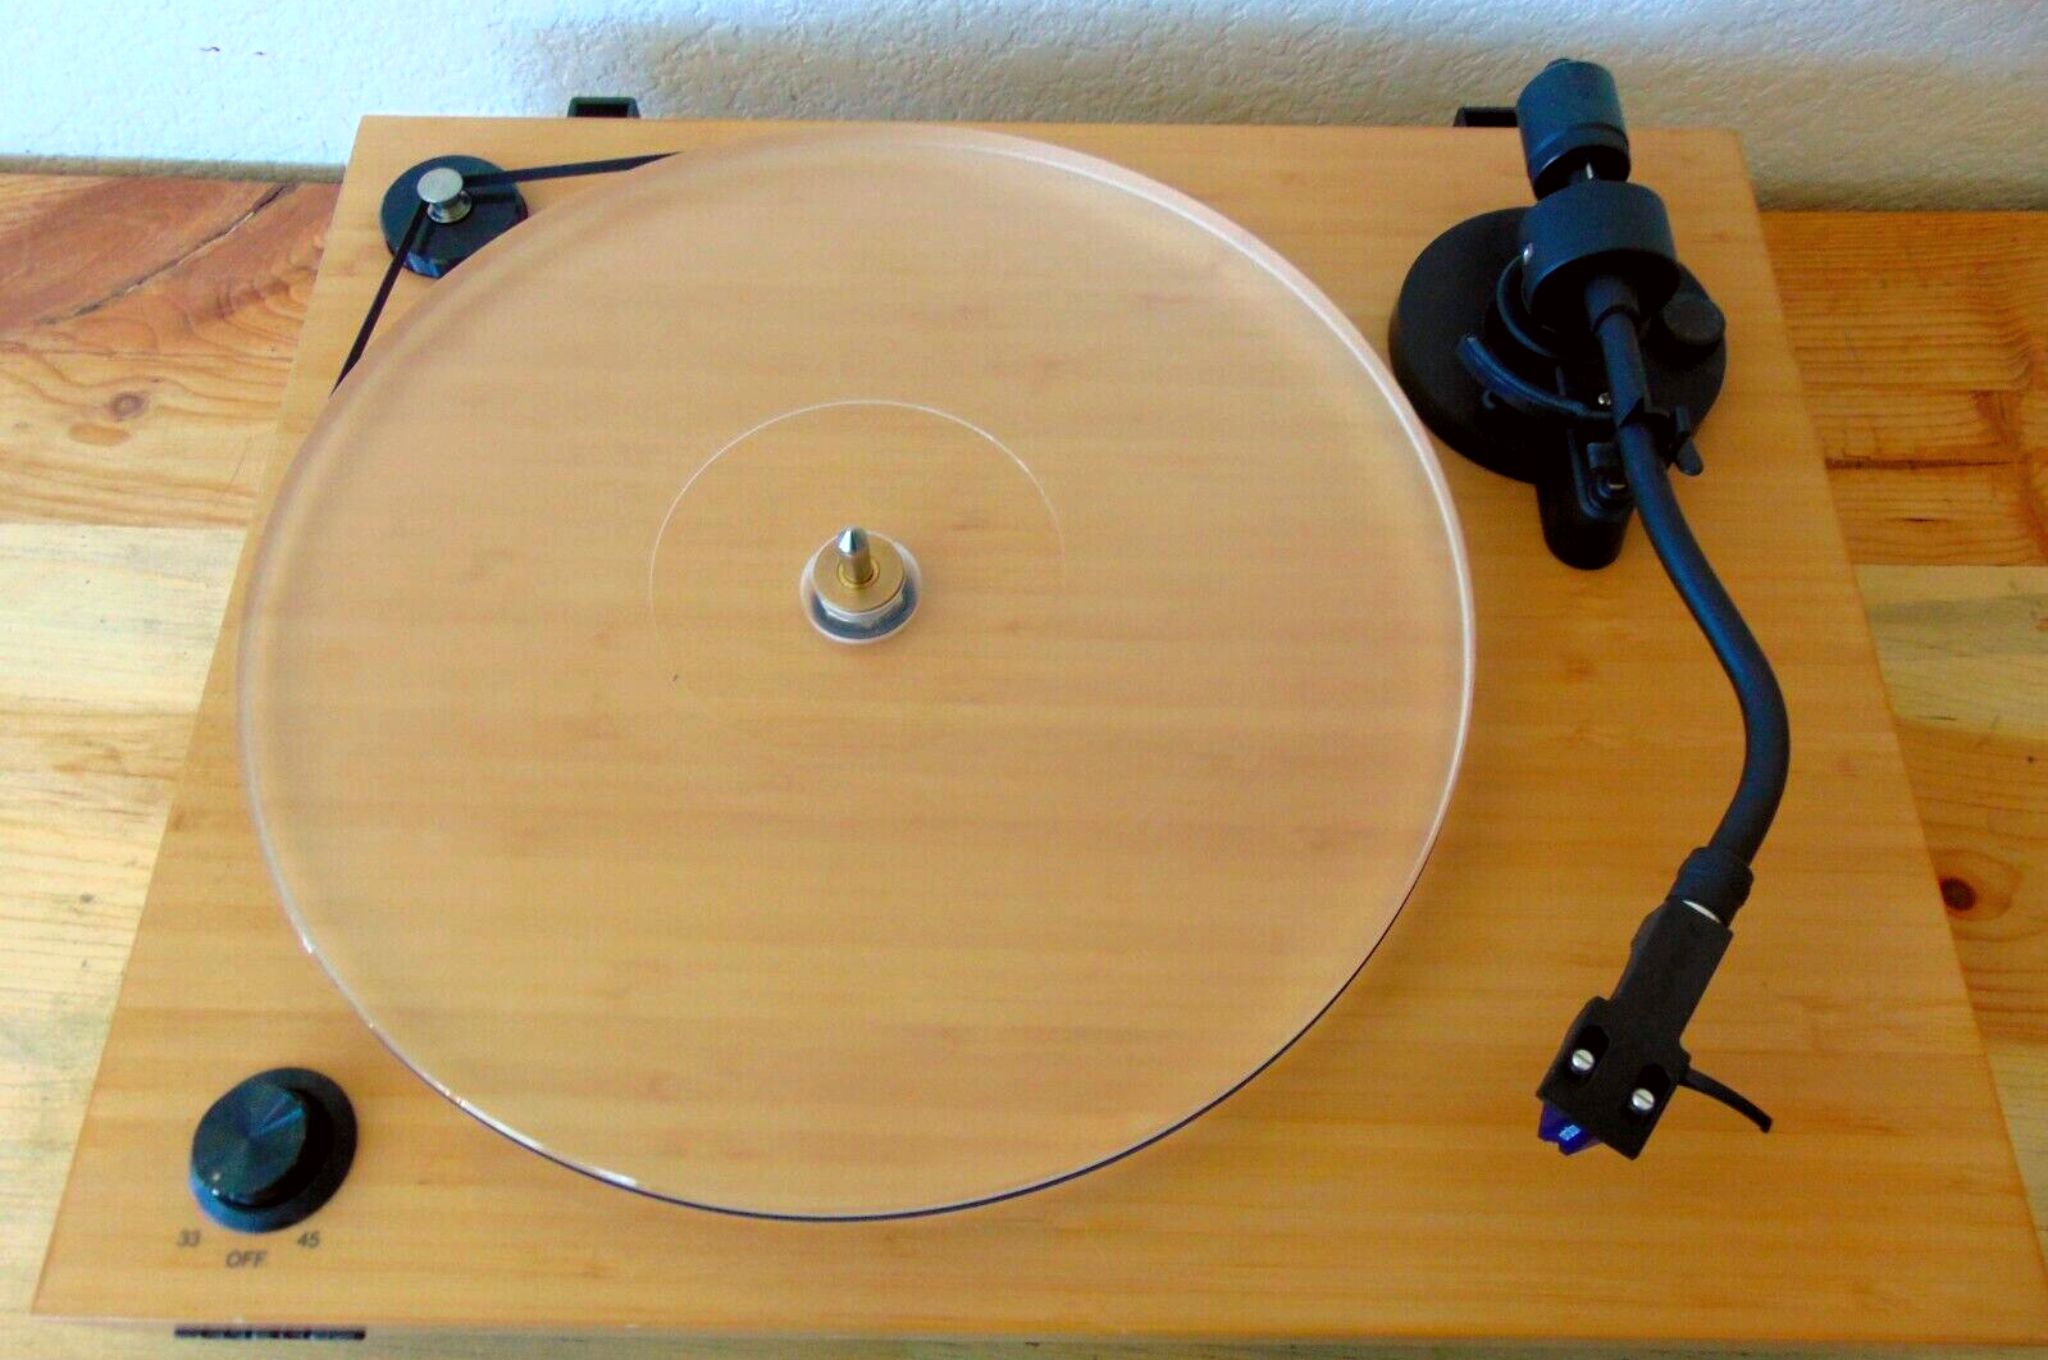 Fluance RT85 turntable in a light wood stain